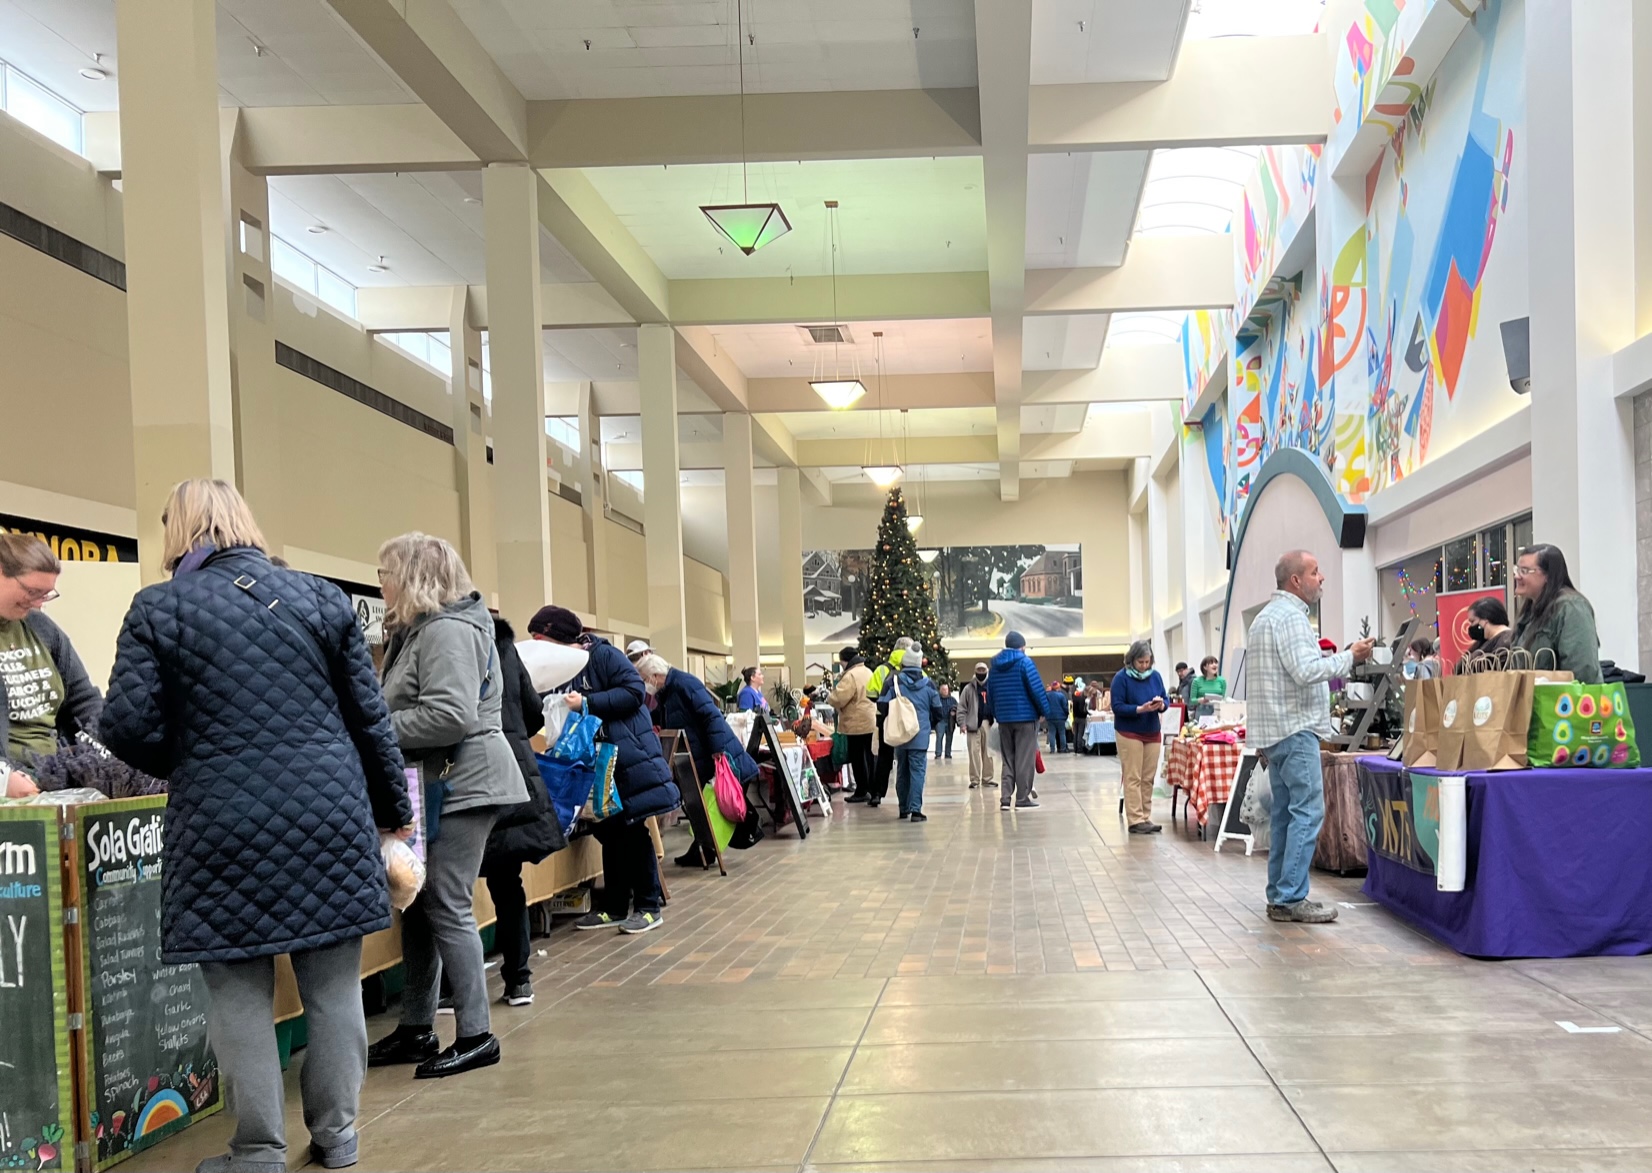 Inside Lincoln Square Mall in Urbana, Illinois, shoppers buy produce and artisan goods at the Winter Farmers' Market hosted by The Land Connection. Photo by Alyssa Buckley.